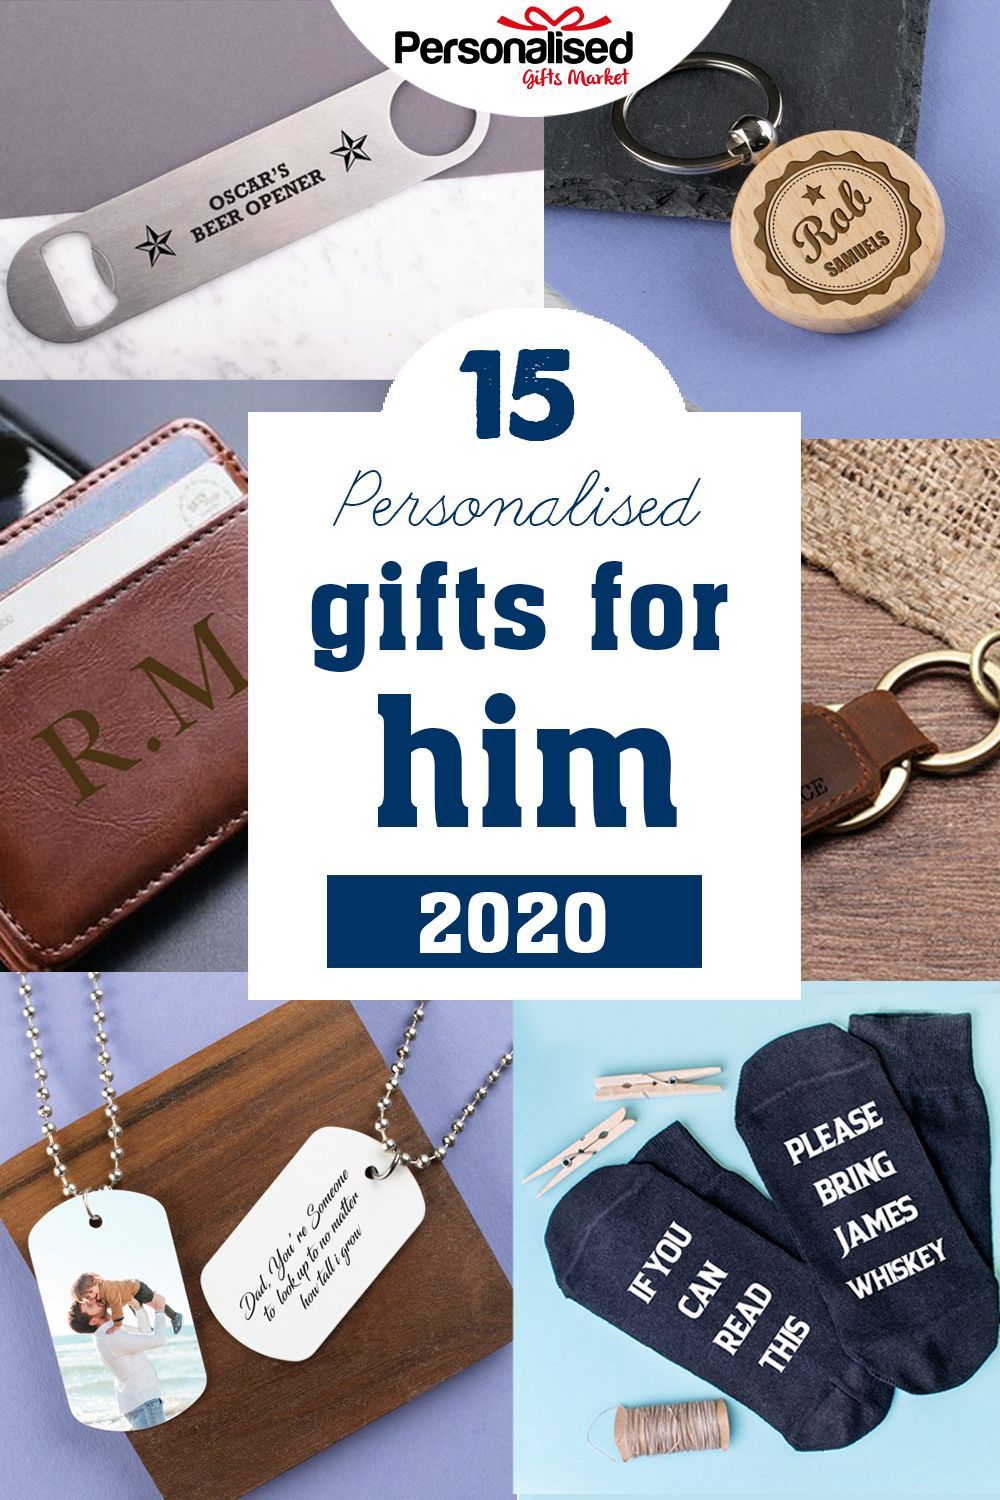 EXCLUSIVE 70% OFF Best Personalised Gift Ideas for Him - EXCLUSIVE 70% OFF Best Personalised Gift Ideas for Him -   18 xmas gifts for boyfriend diy ideas